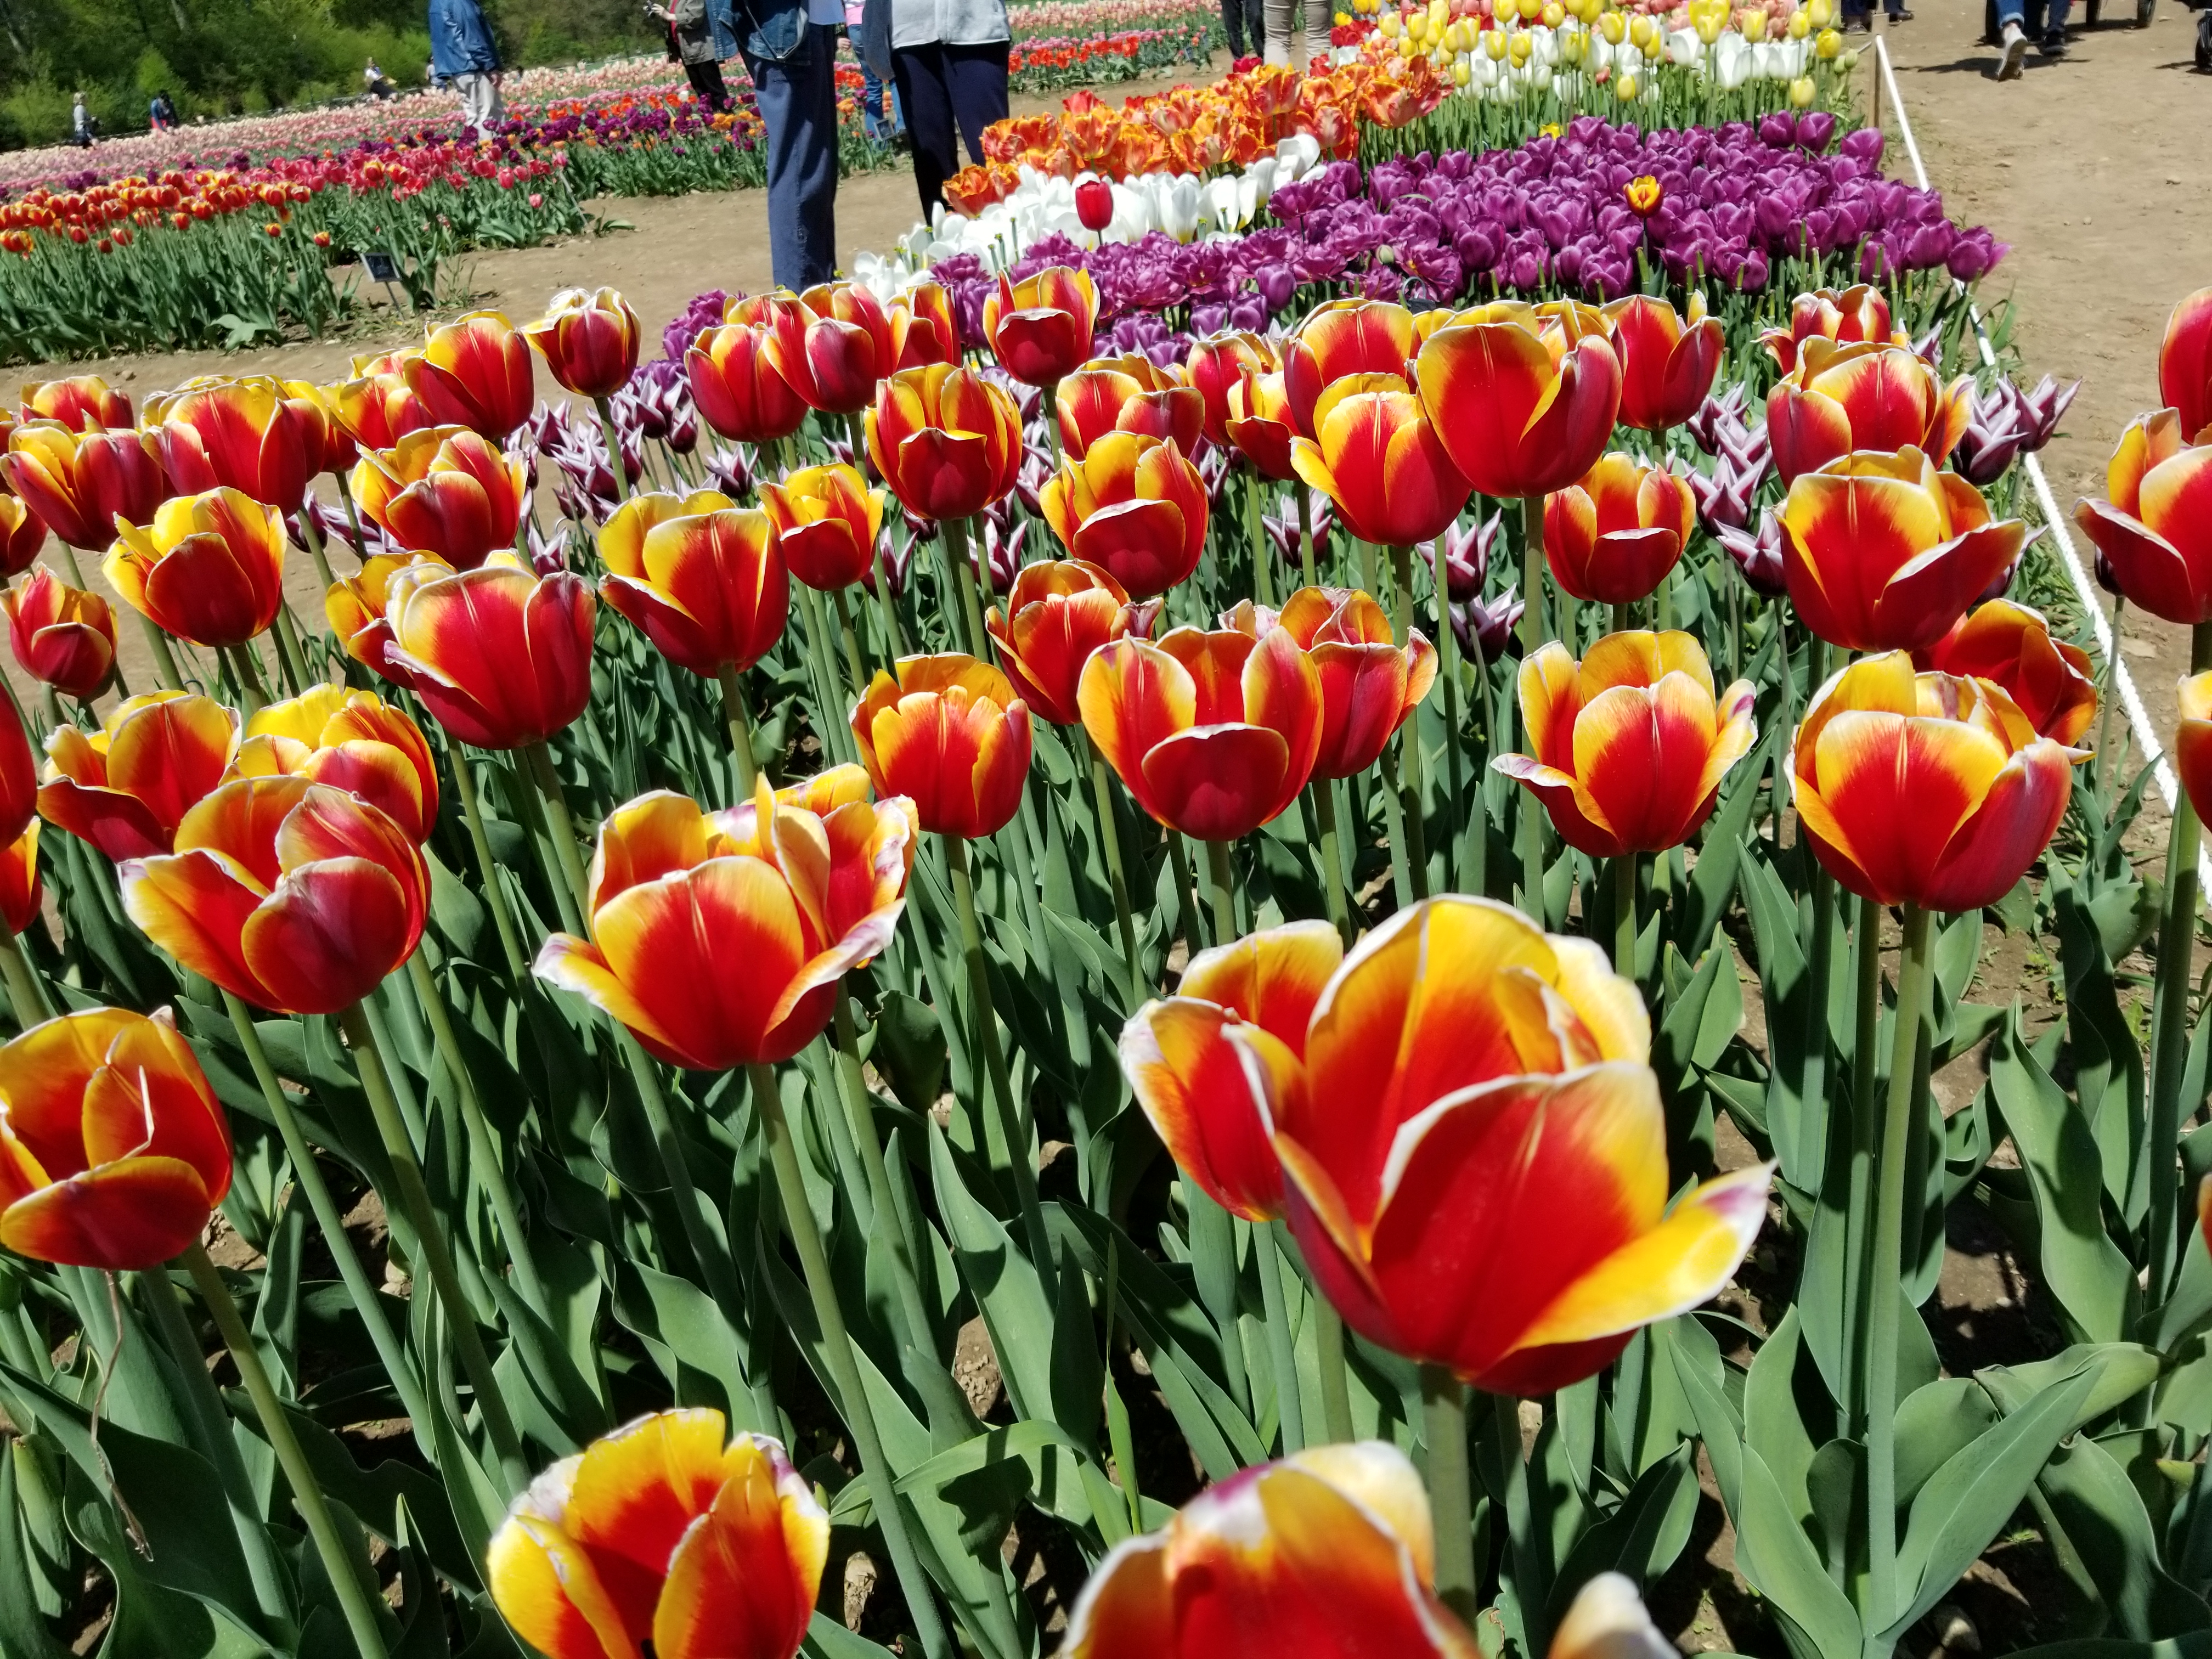 Colorful tulips blooming in the garden - an experience included in the Springtime in New England Tour.